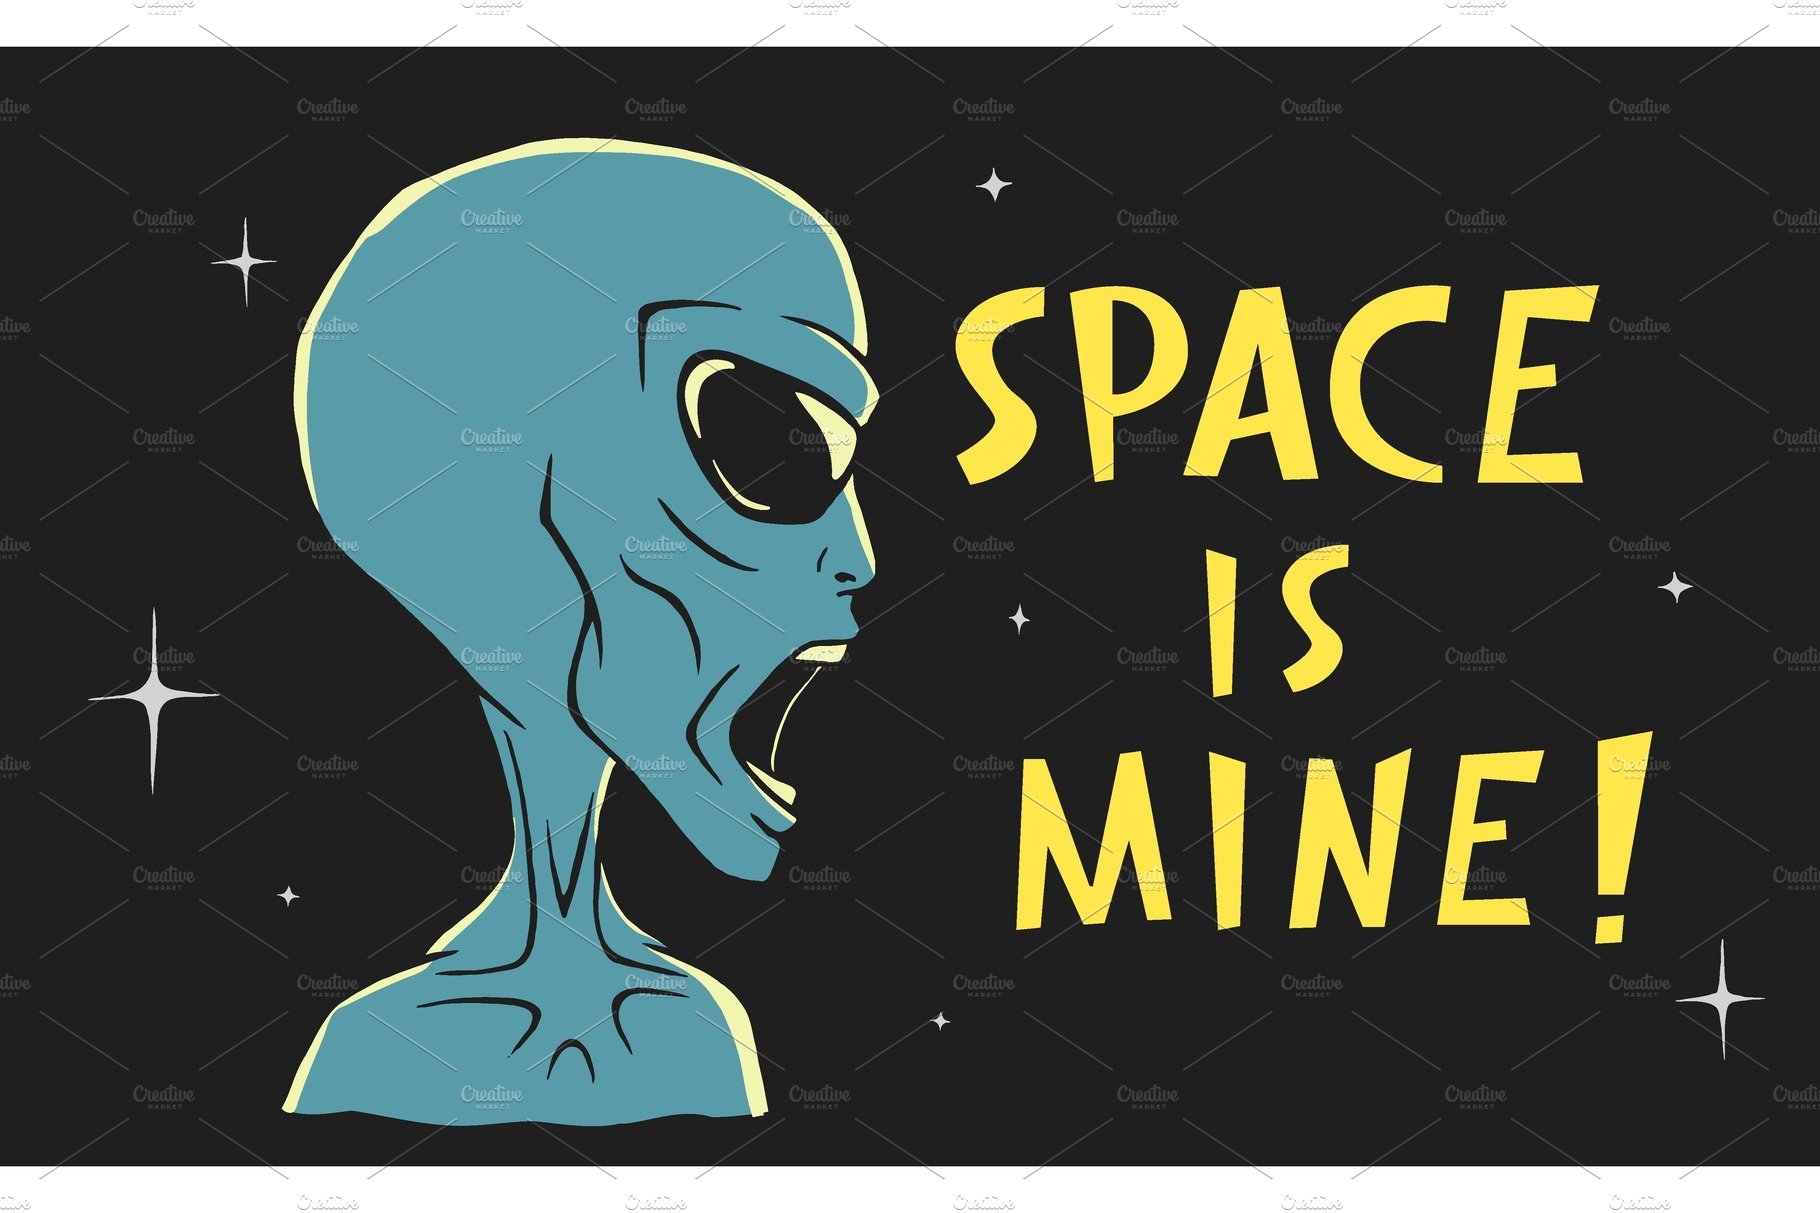 Space is mine cover image.